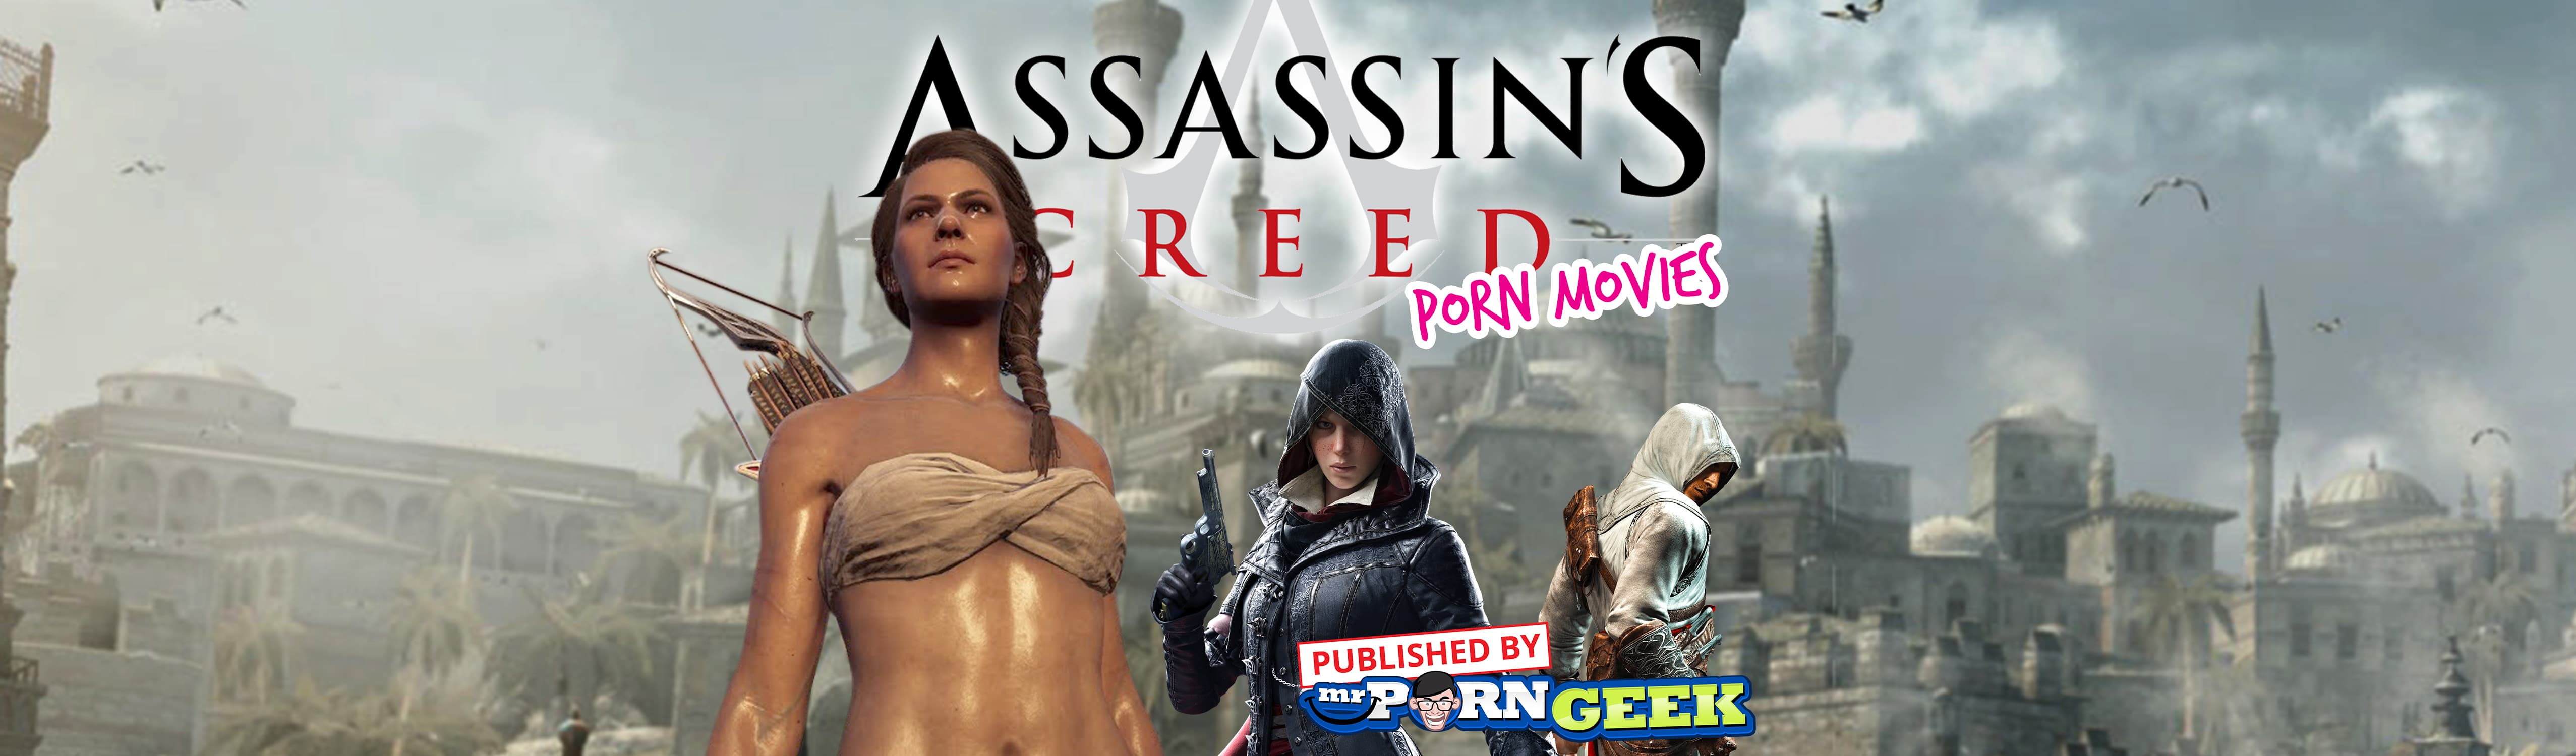 best of Review odyssey assassins creed